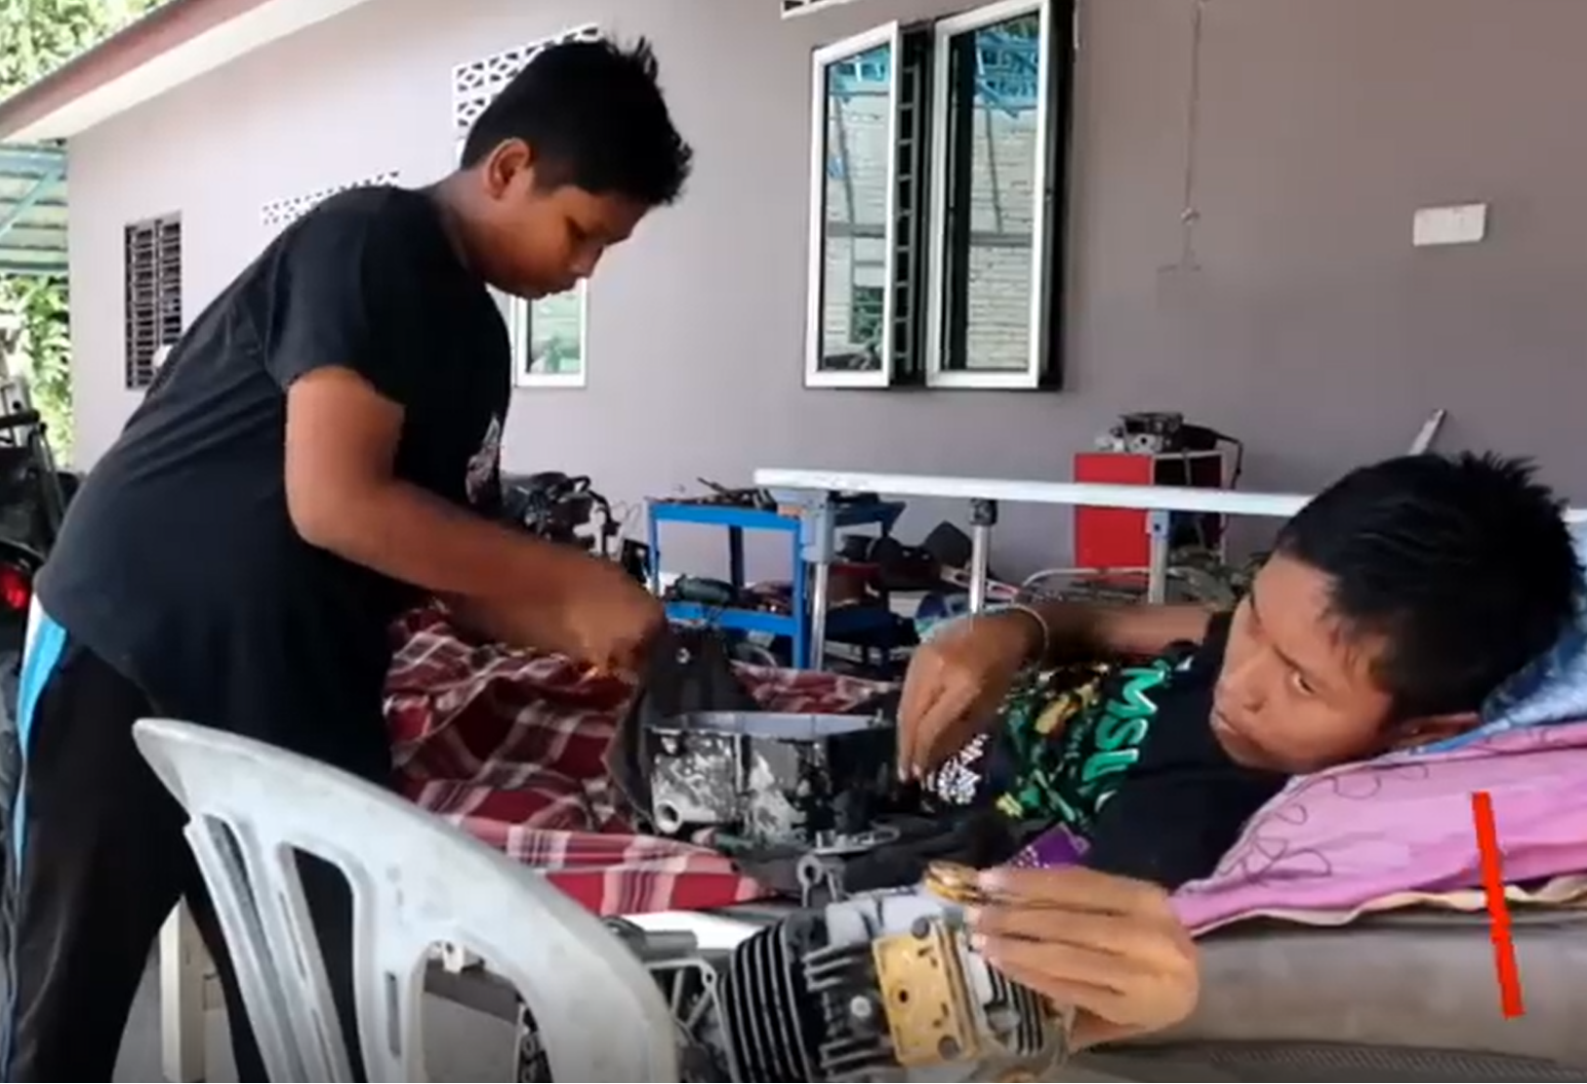 bedridden repairs motorcycle - younger brother